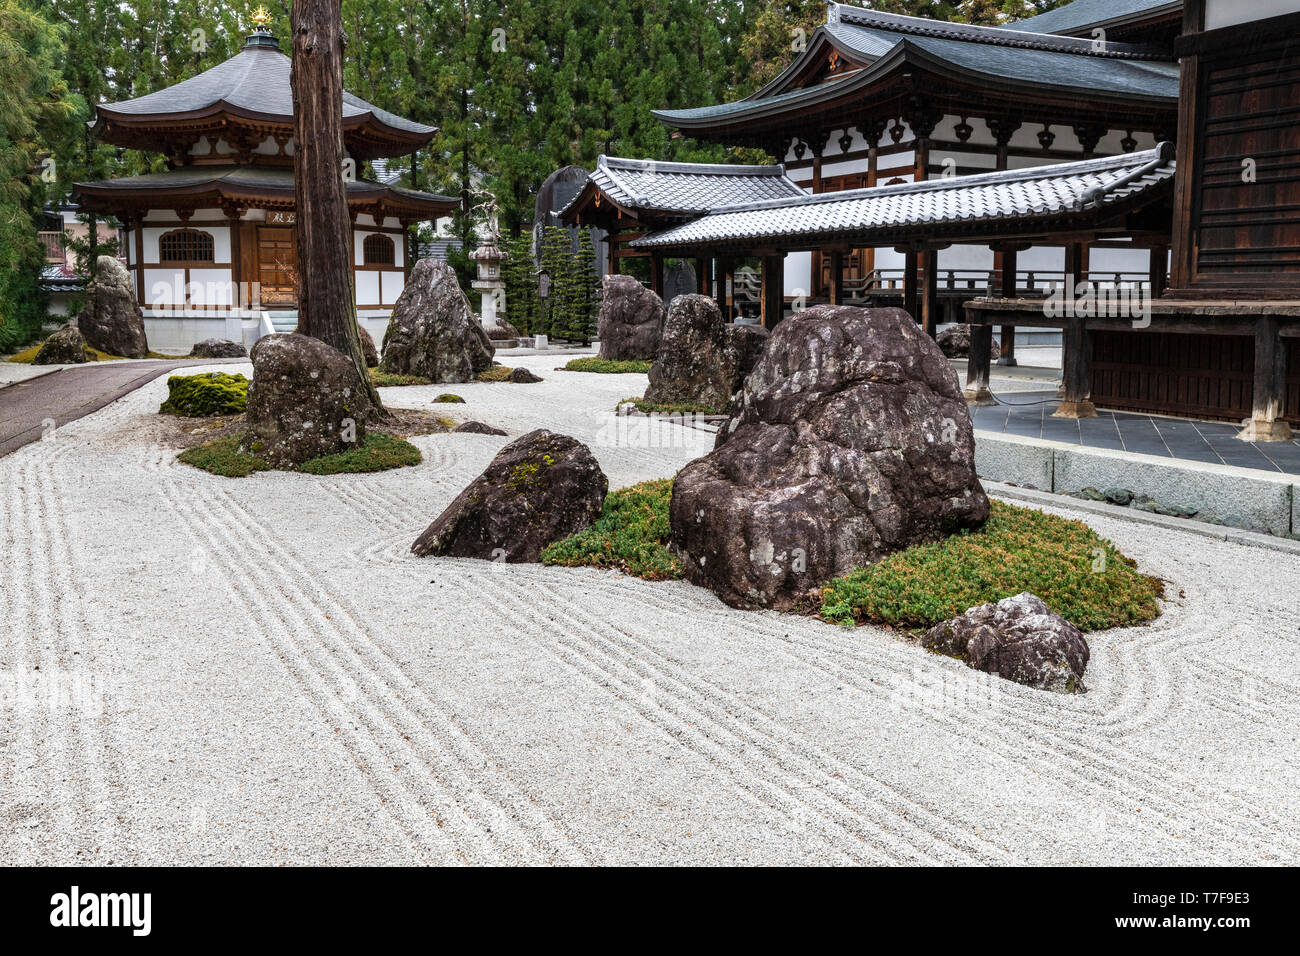 Jiunji Temple Zen Garden - Jiunji Temple is blessed with a variety of growth: pine, cherry blossoms as well as a dry rock garden and moss which highli Stock Photo